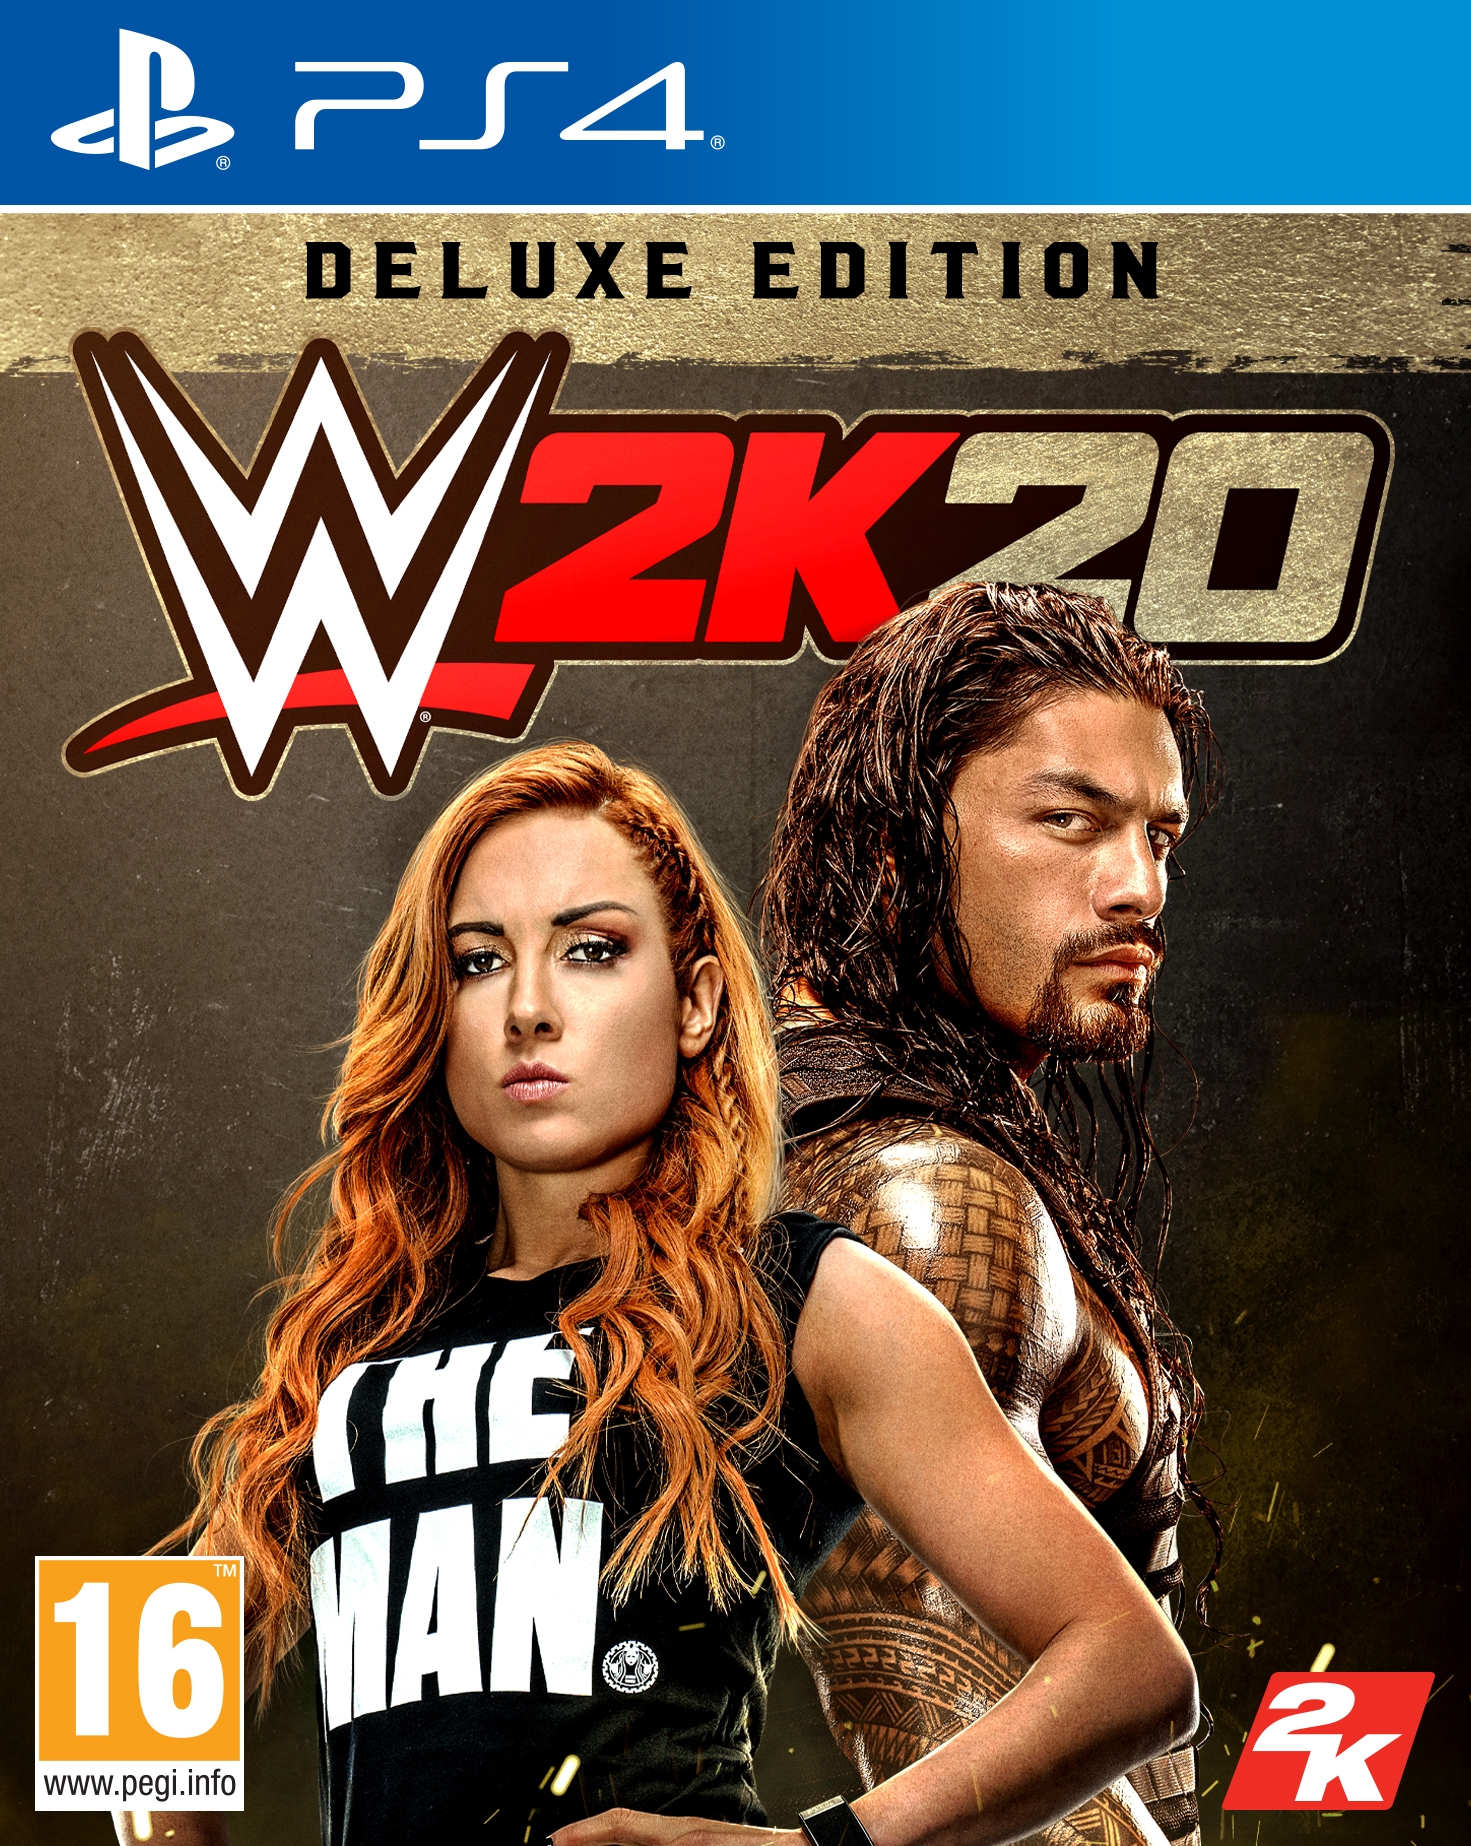 PS4 WWE 2K20 Deluxe Edition